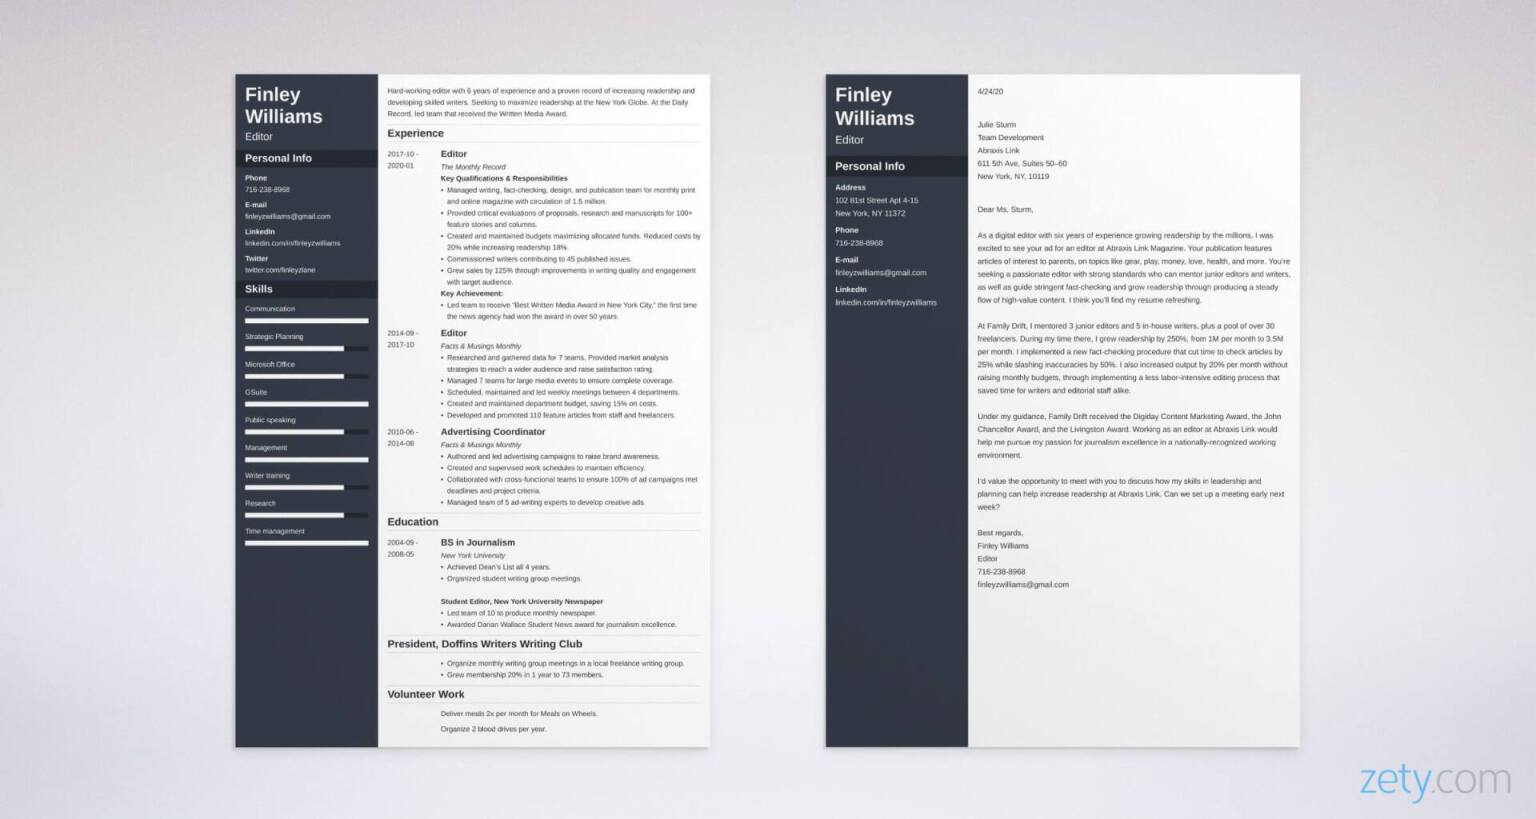 editor resume and cover letter set